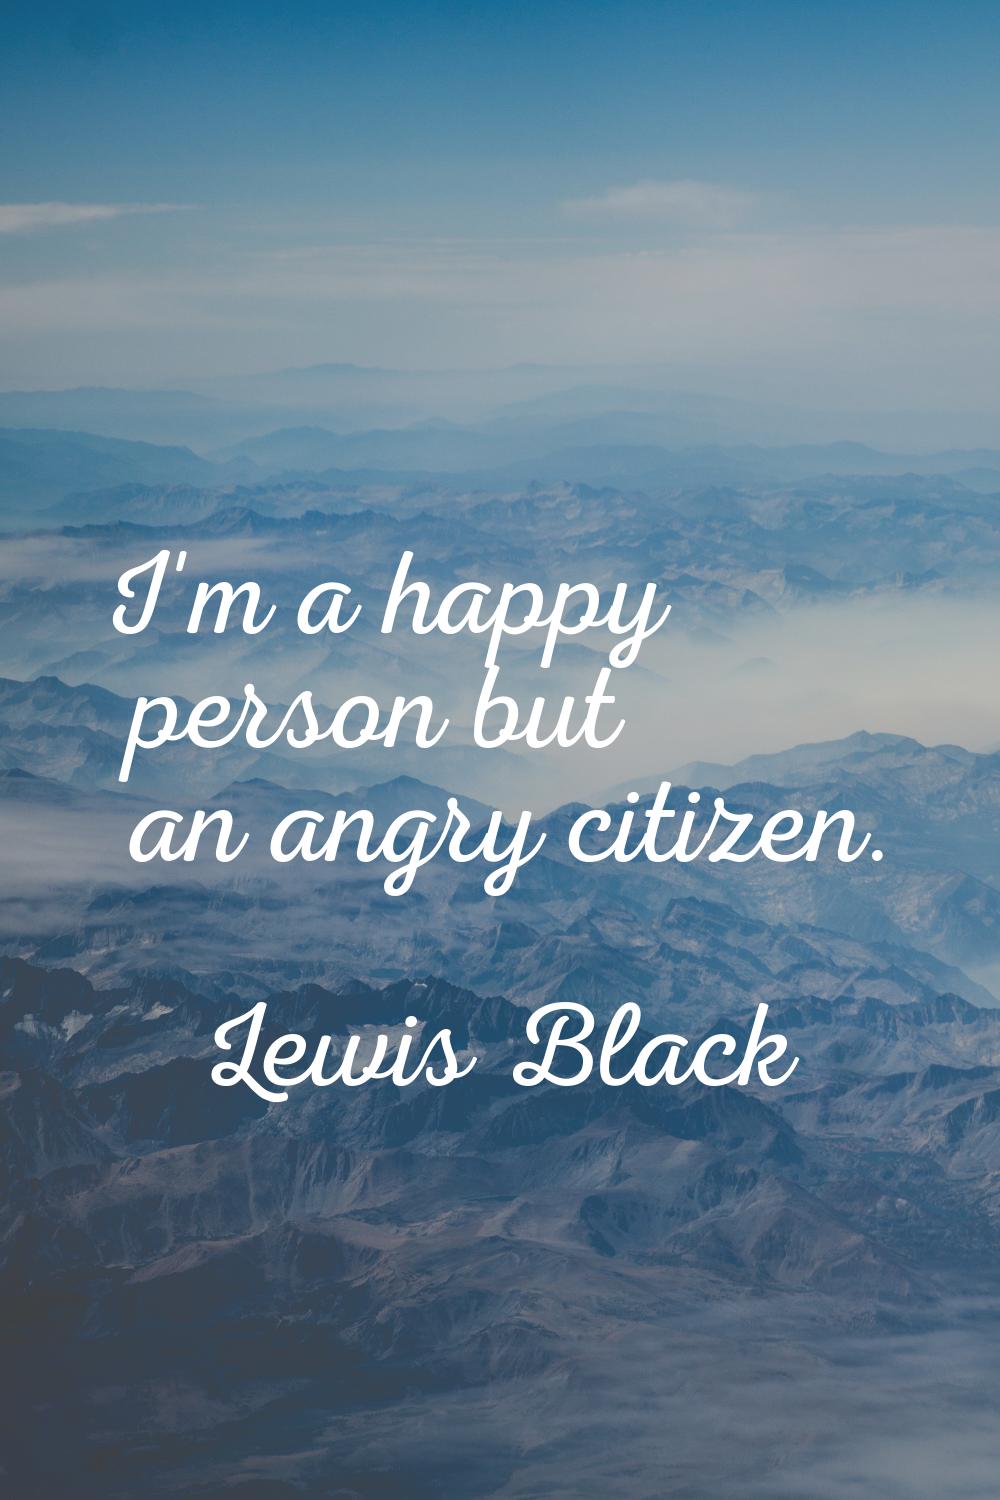 I'm a happy person but an angry citizen.